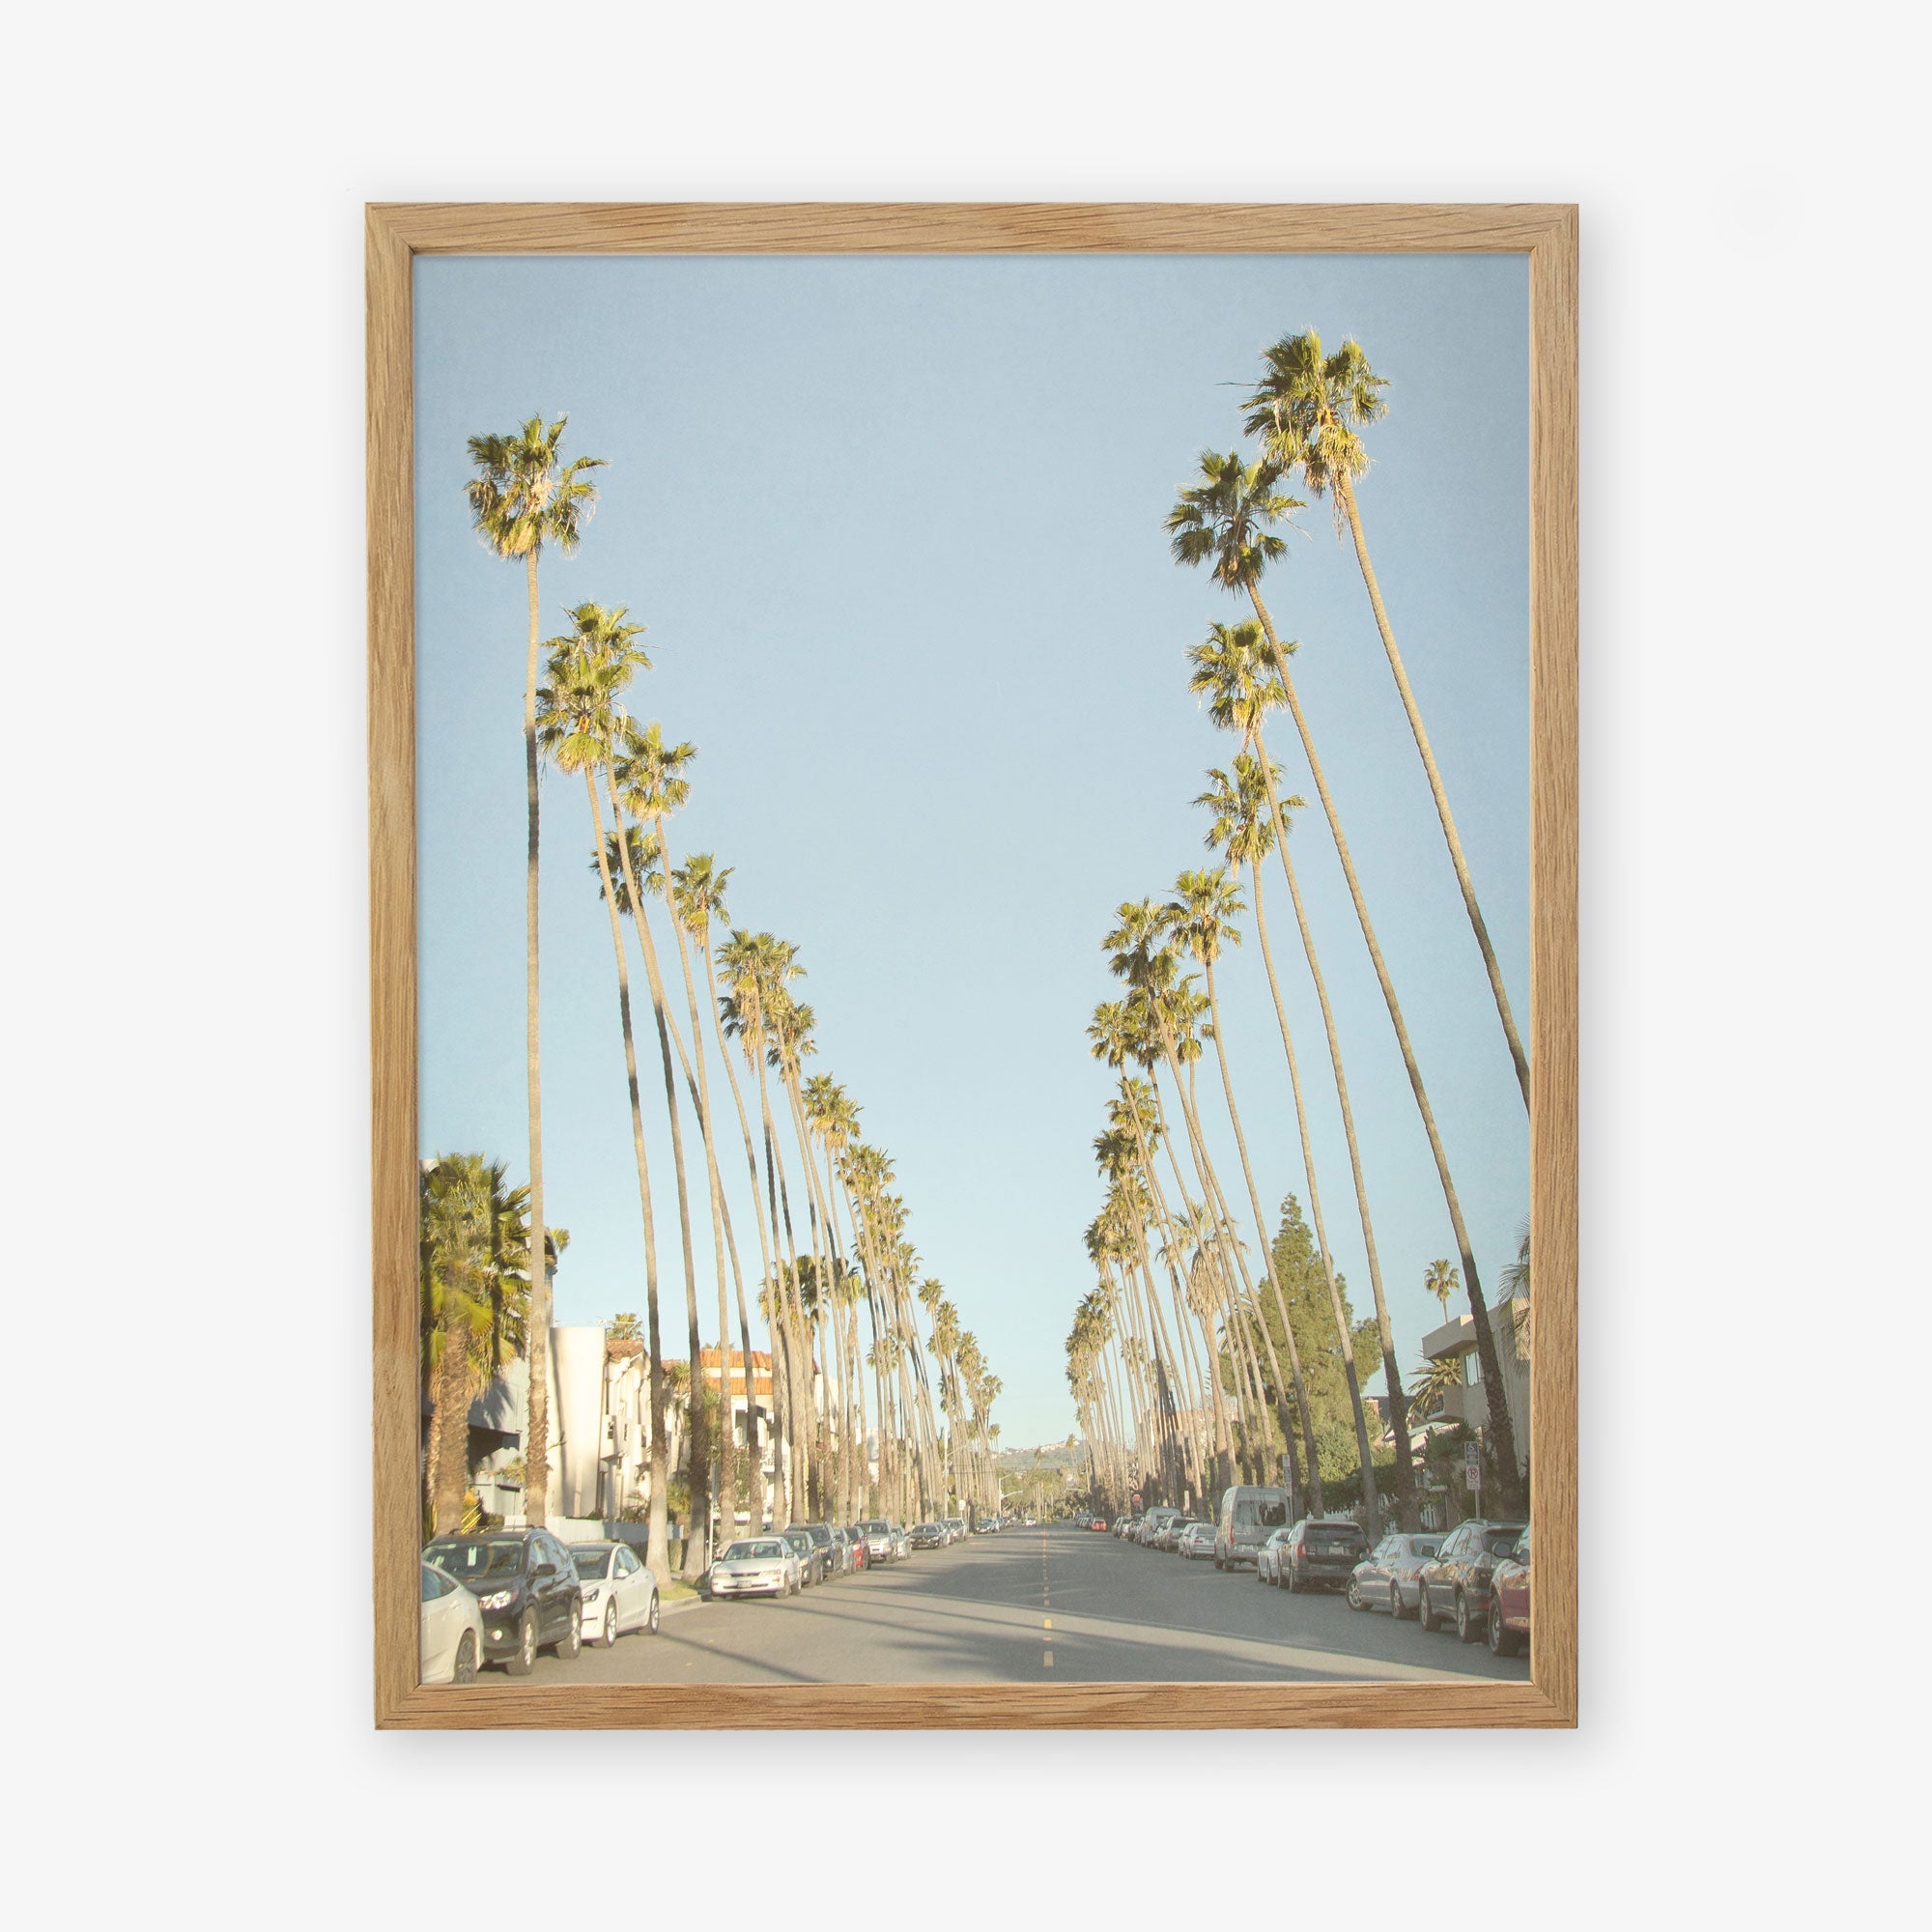 A framed picture of Los Angeles Palm Tree Lined Street &#39;Sunset Boulevard Dreams&#39;, lined with tall palm trees and parked cars, evoking a calm, suburban atmosphere by Offley Green.